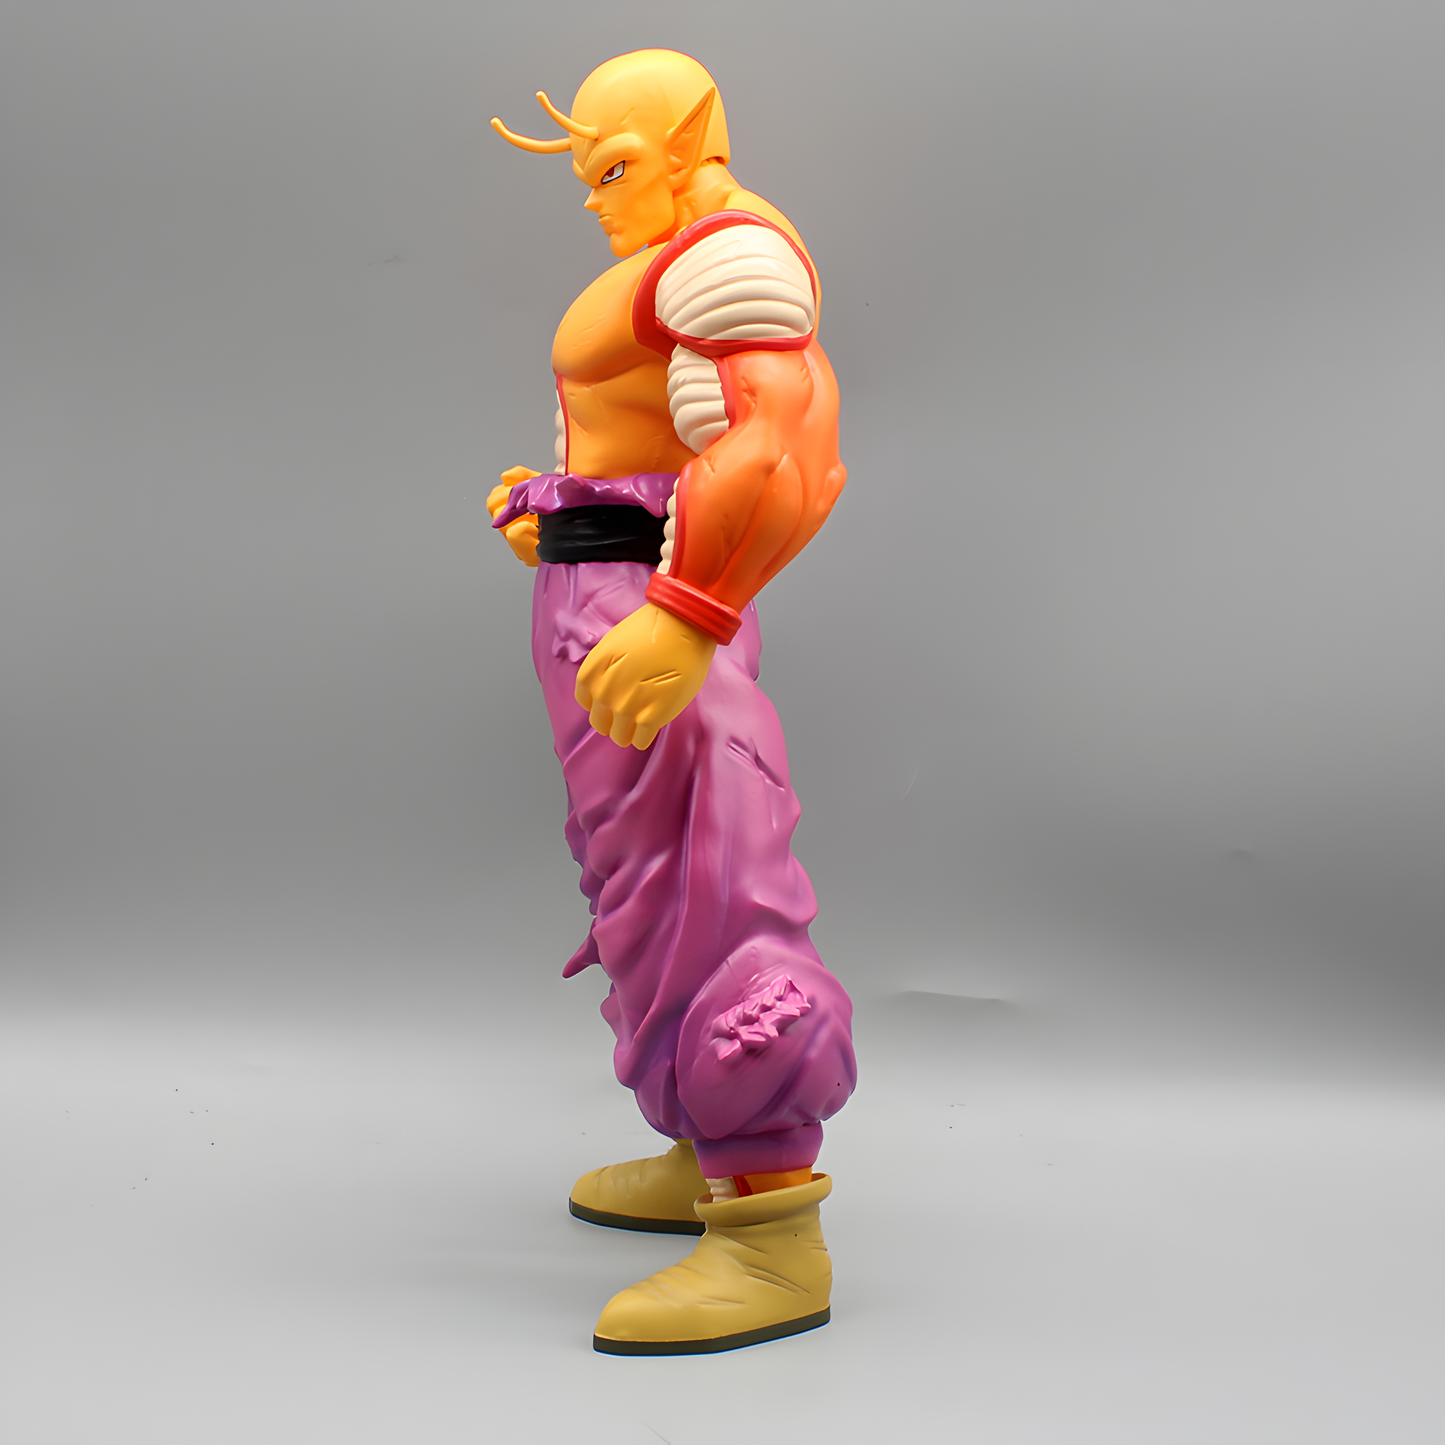 Side view of the Piccolo Dragon Ball figure, illustrating his concentrated expression and the draped purple garment, ready for battle.